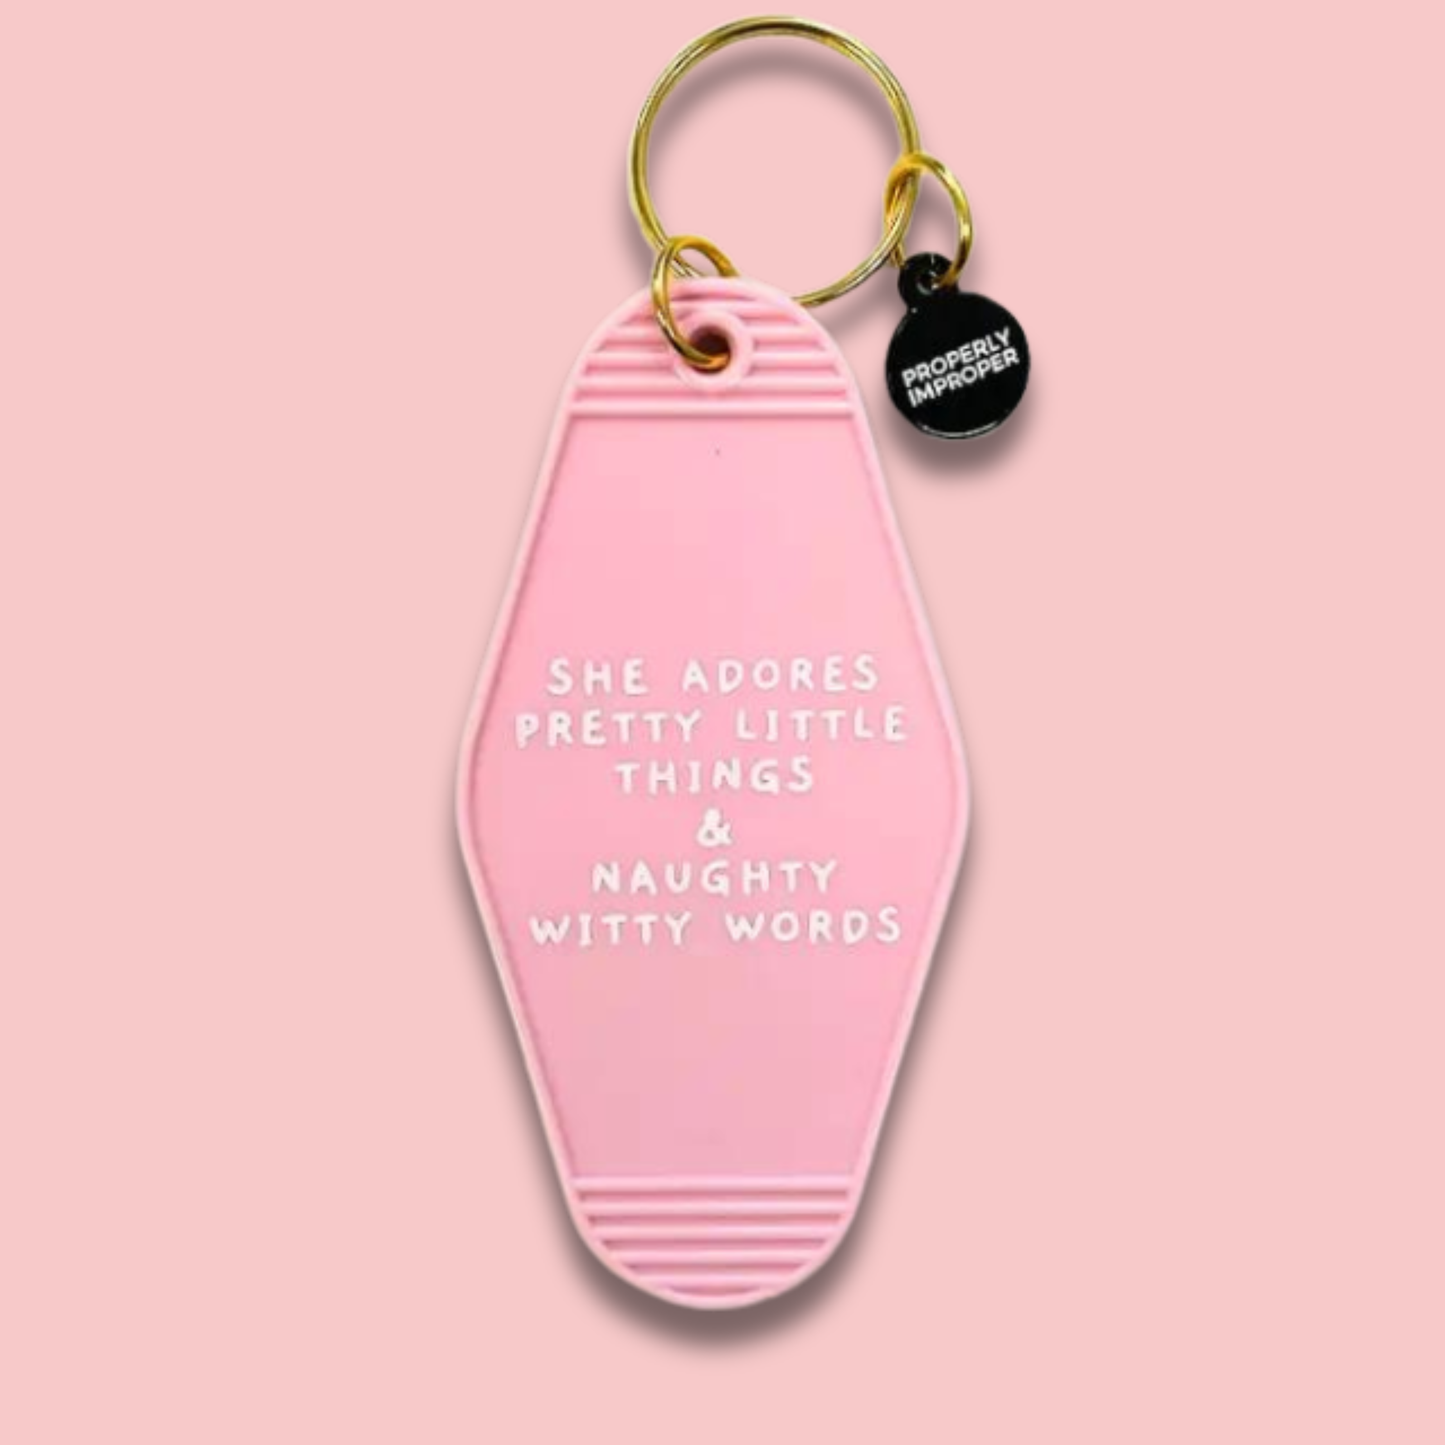 She Adores Pretty Little Things - Keychain